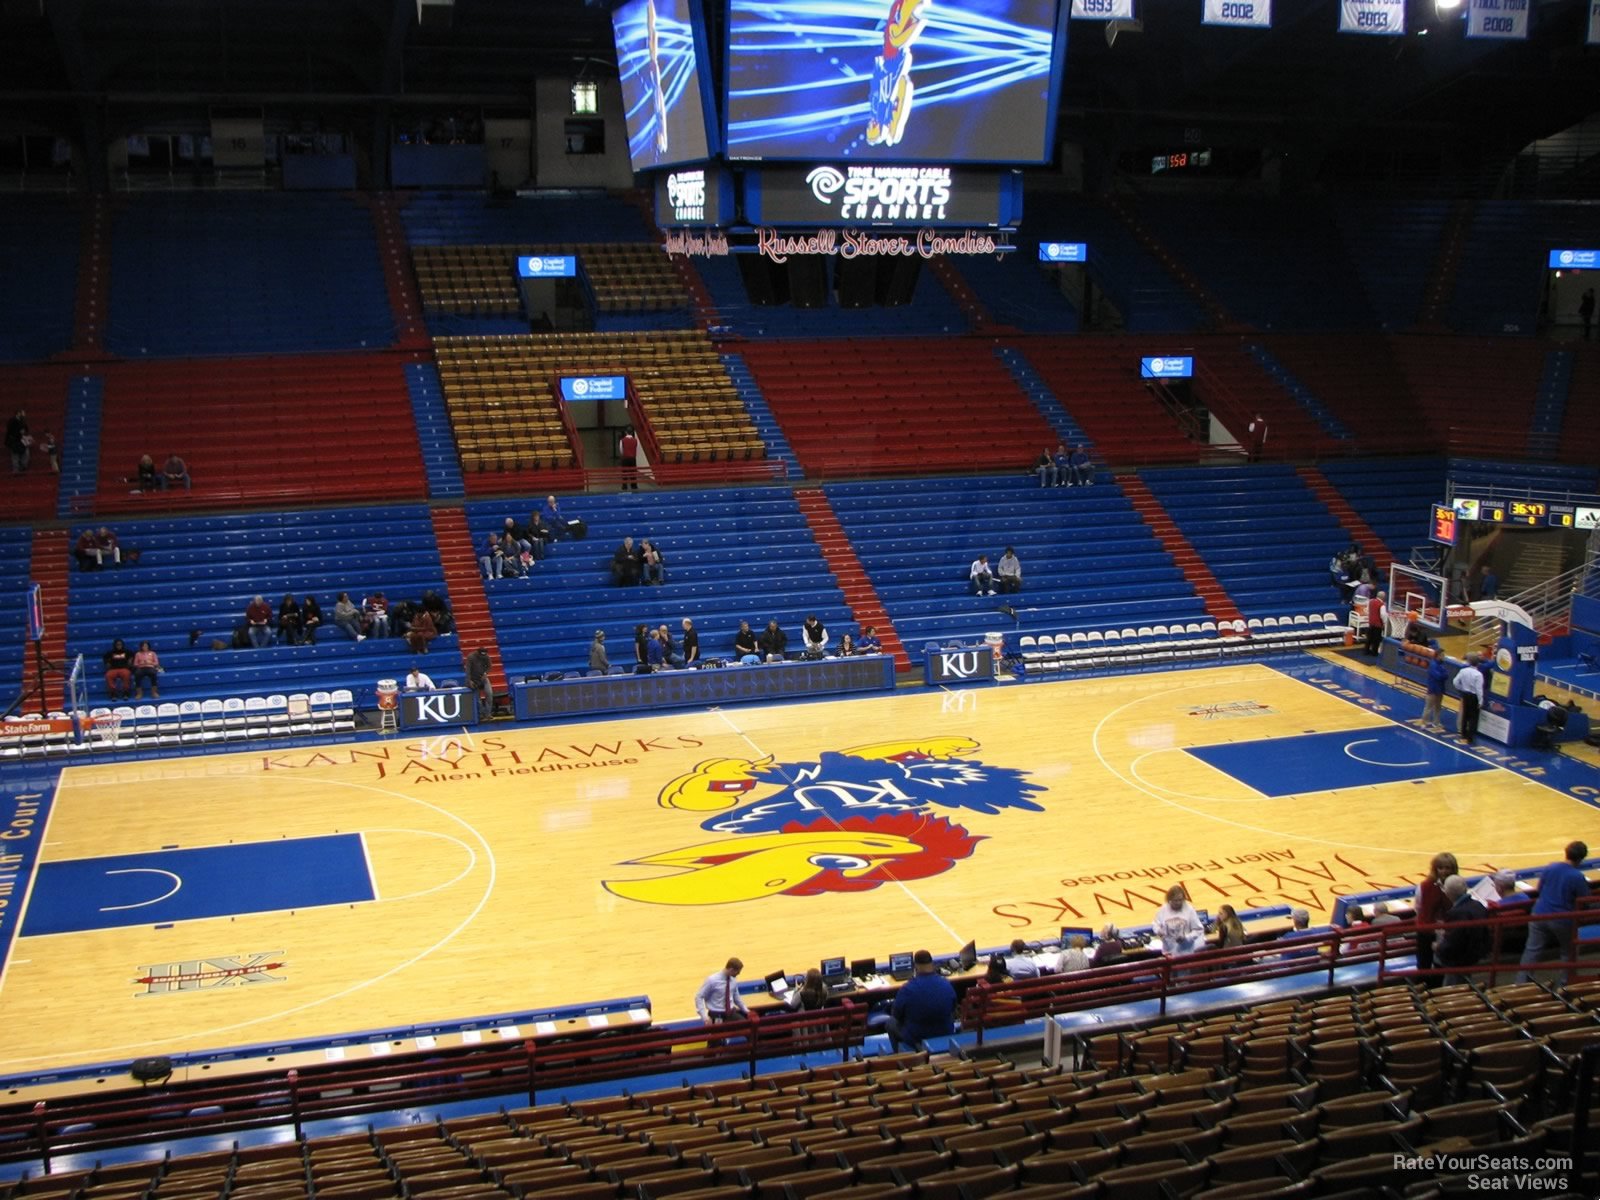 Section 7 at Allen Fieldhouse